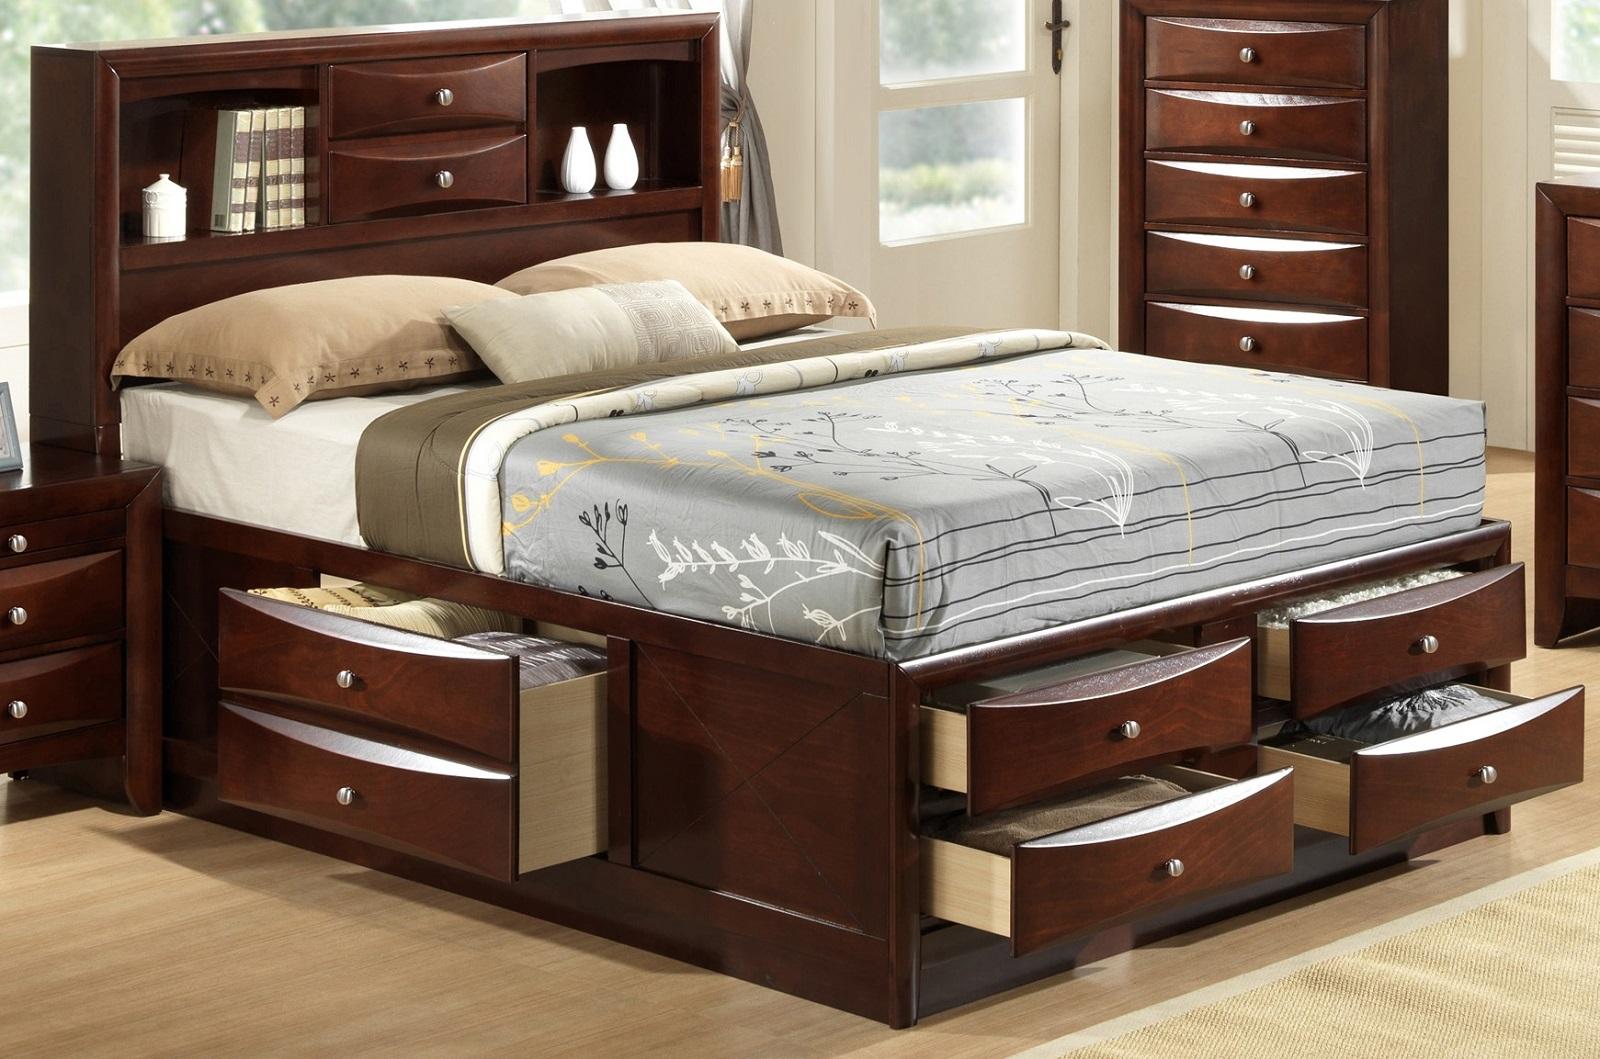 

    
Galaxy Home Furniture EMILY Storage Bedroom Set Cherry GHF-808857938411
